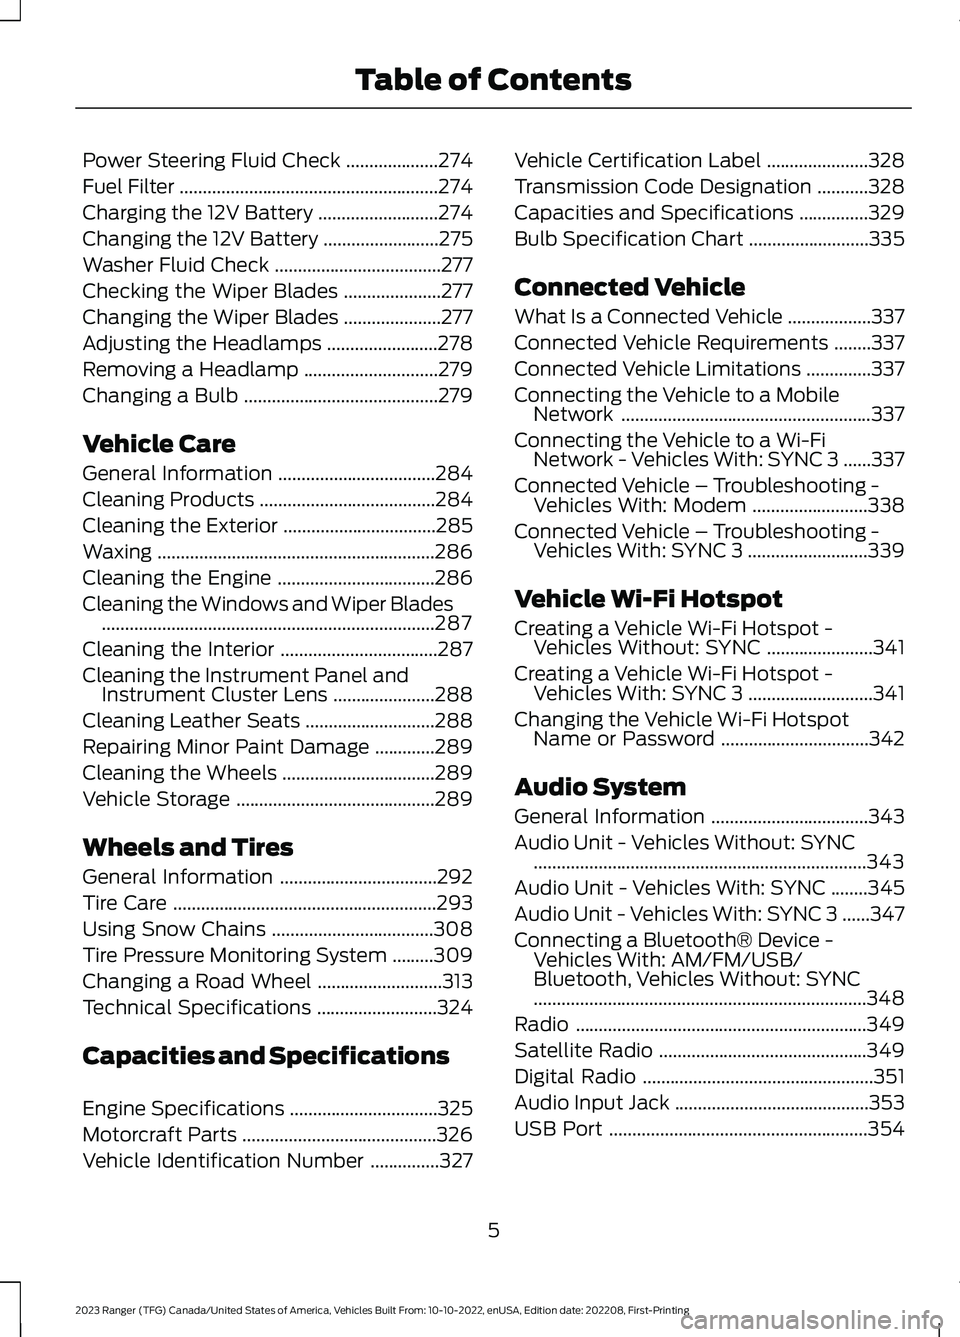 FORD RANGER 2023  Owners Manual Power Steering Fluid Check....................274
Fuel Filter........................................................274
Charging the 12V Battery..........................274
Changing the 12V Battery.